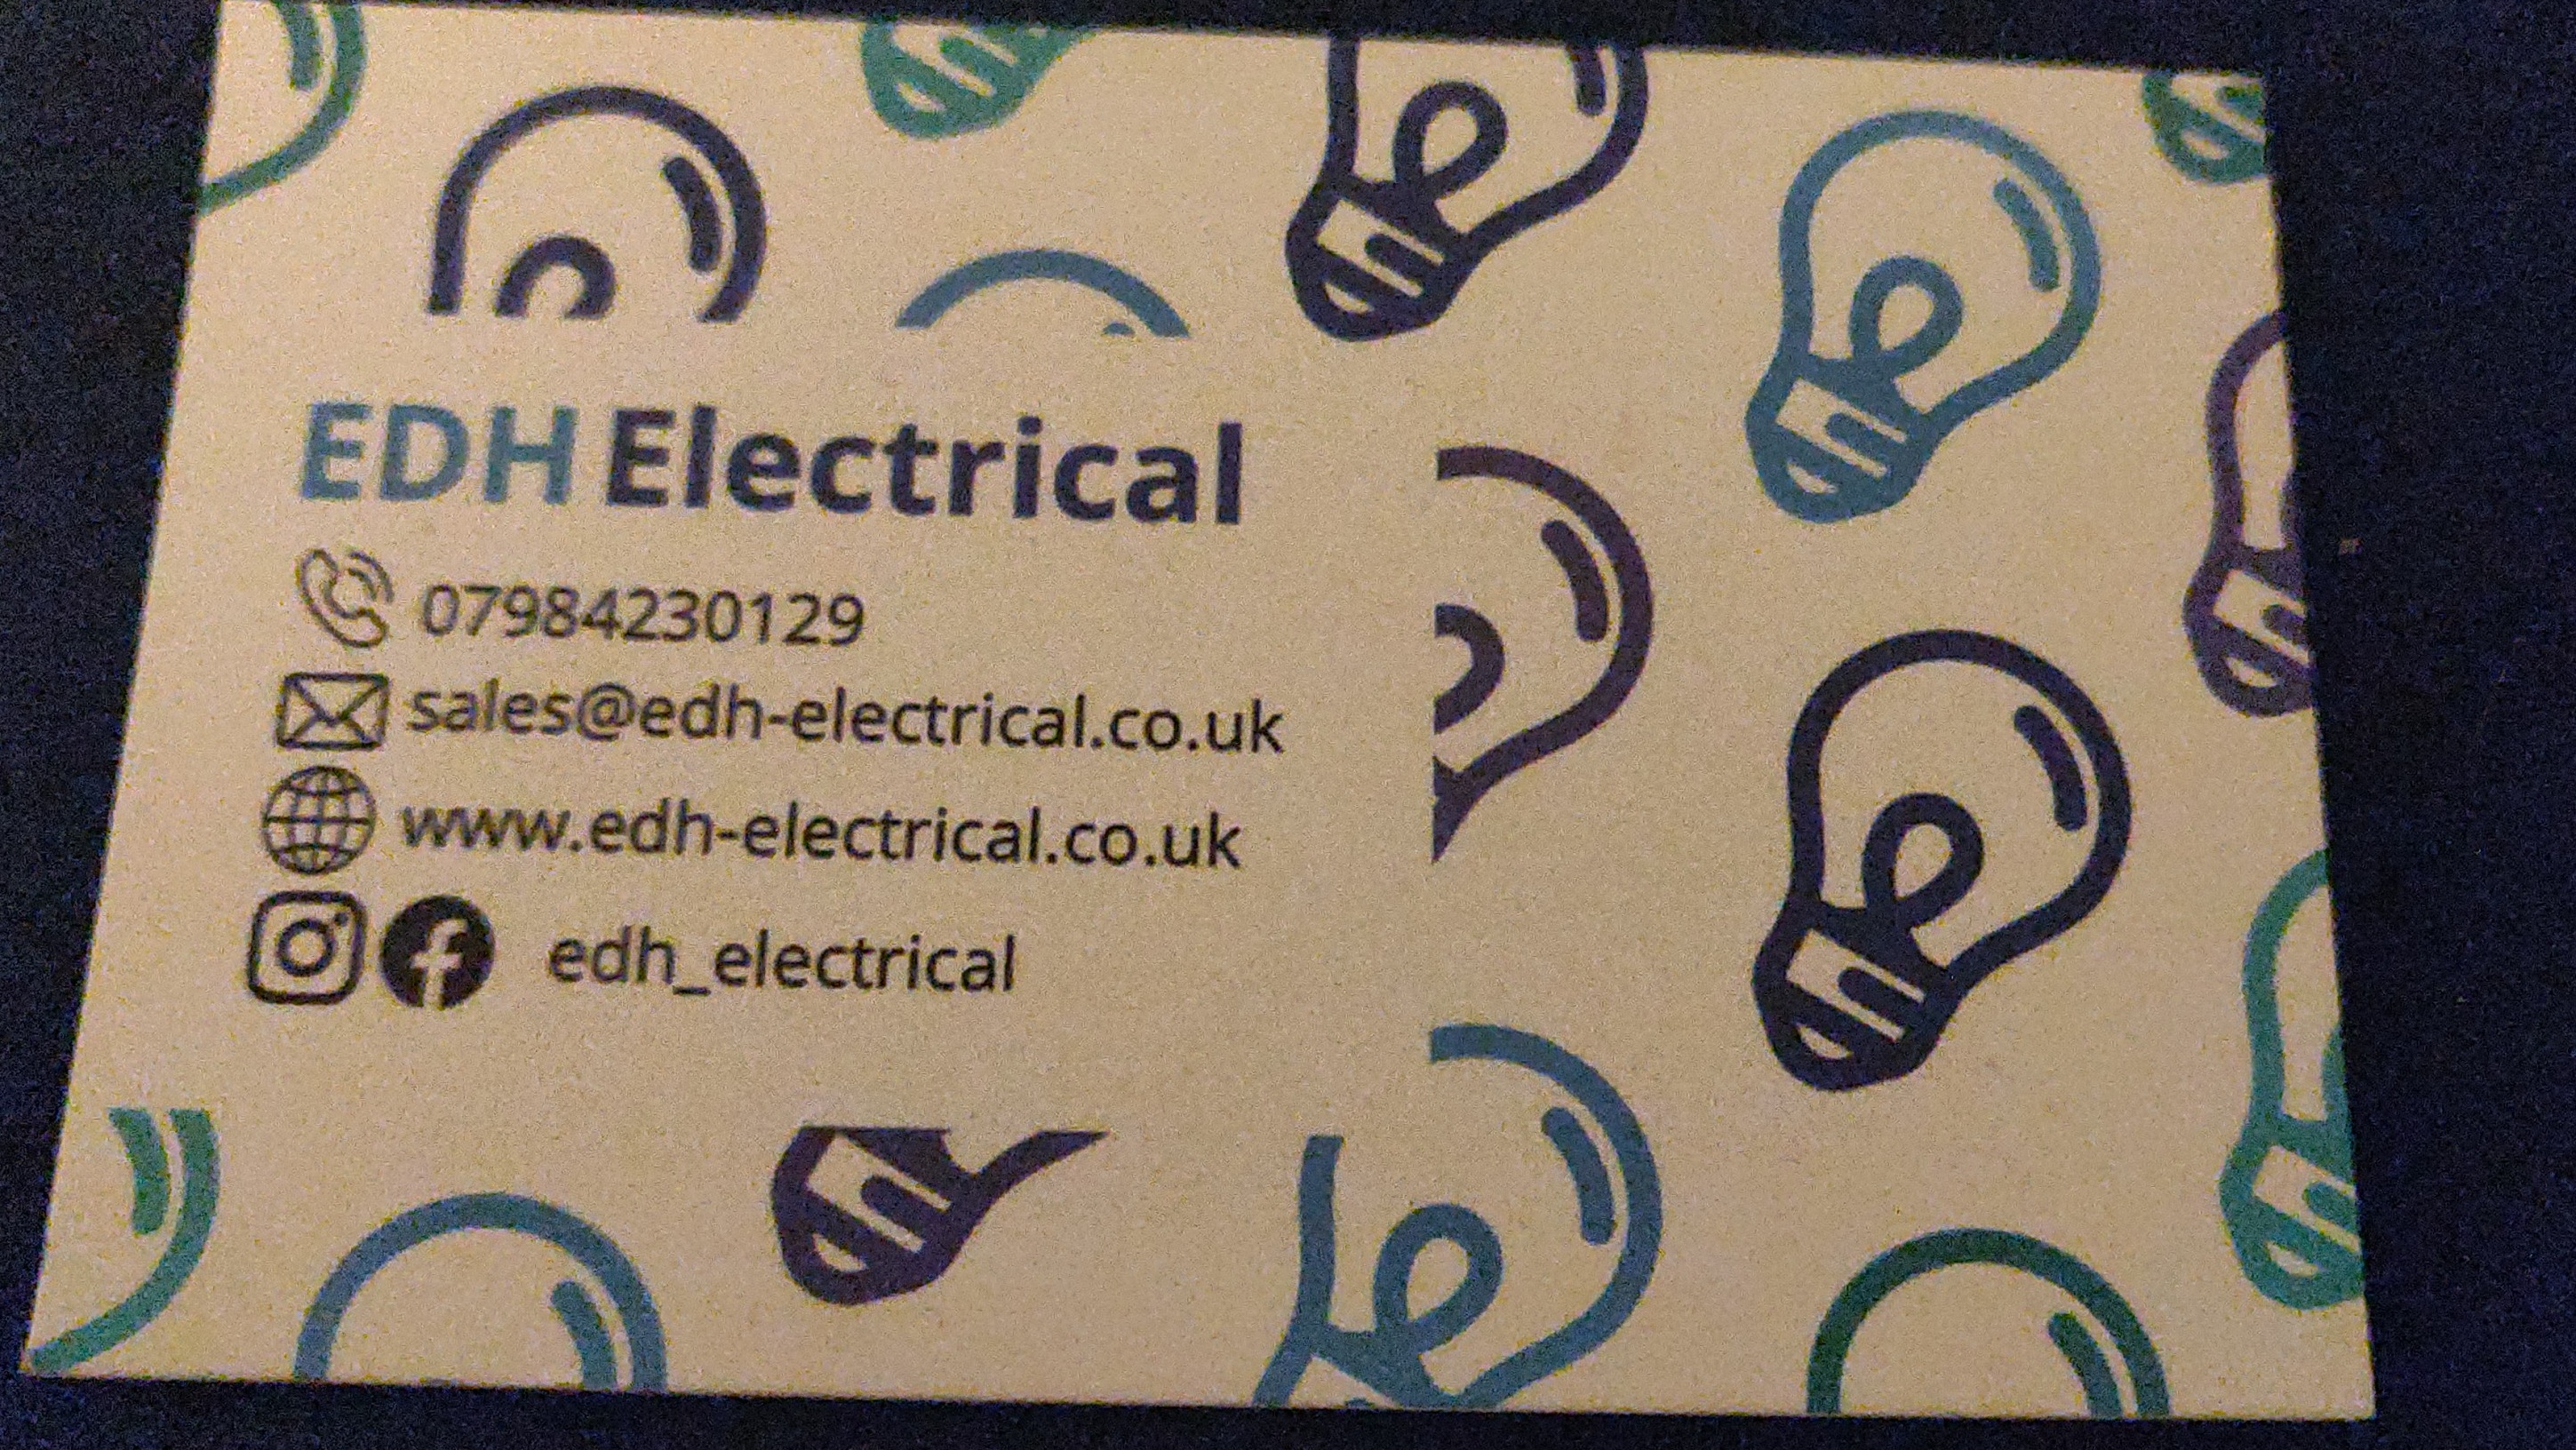 EDH Electrical, find us on Facebook and Instagram 